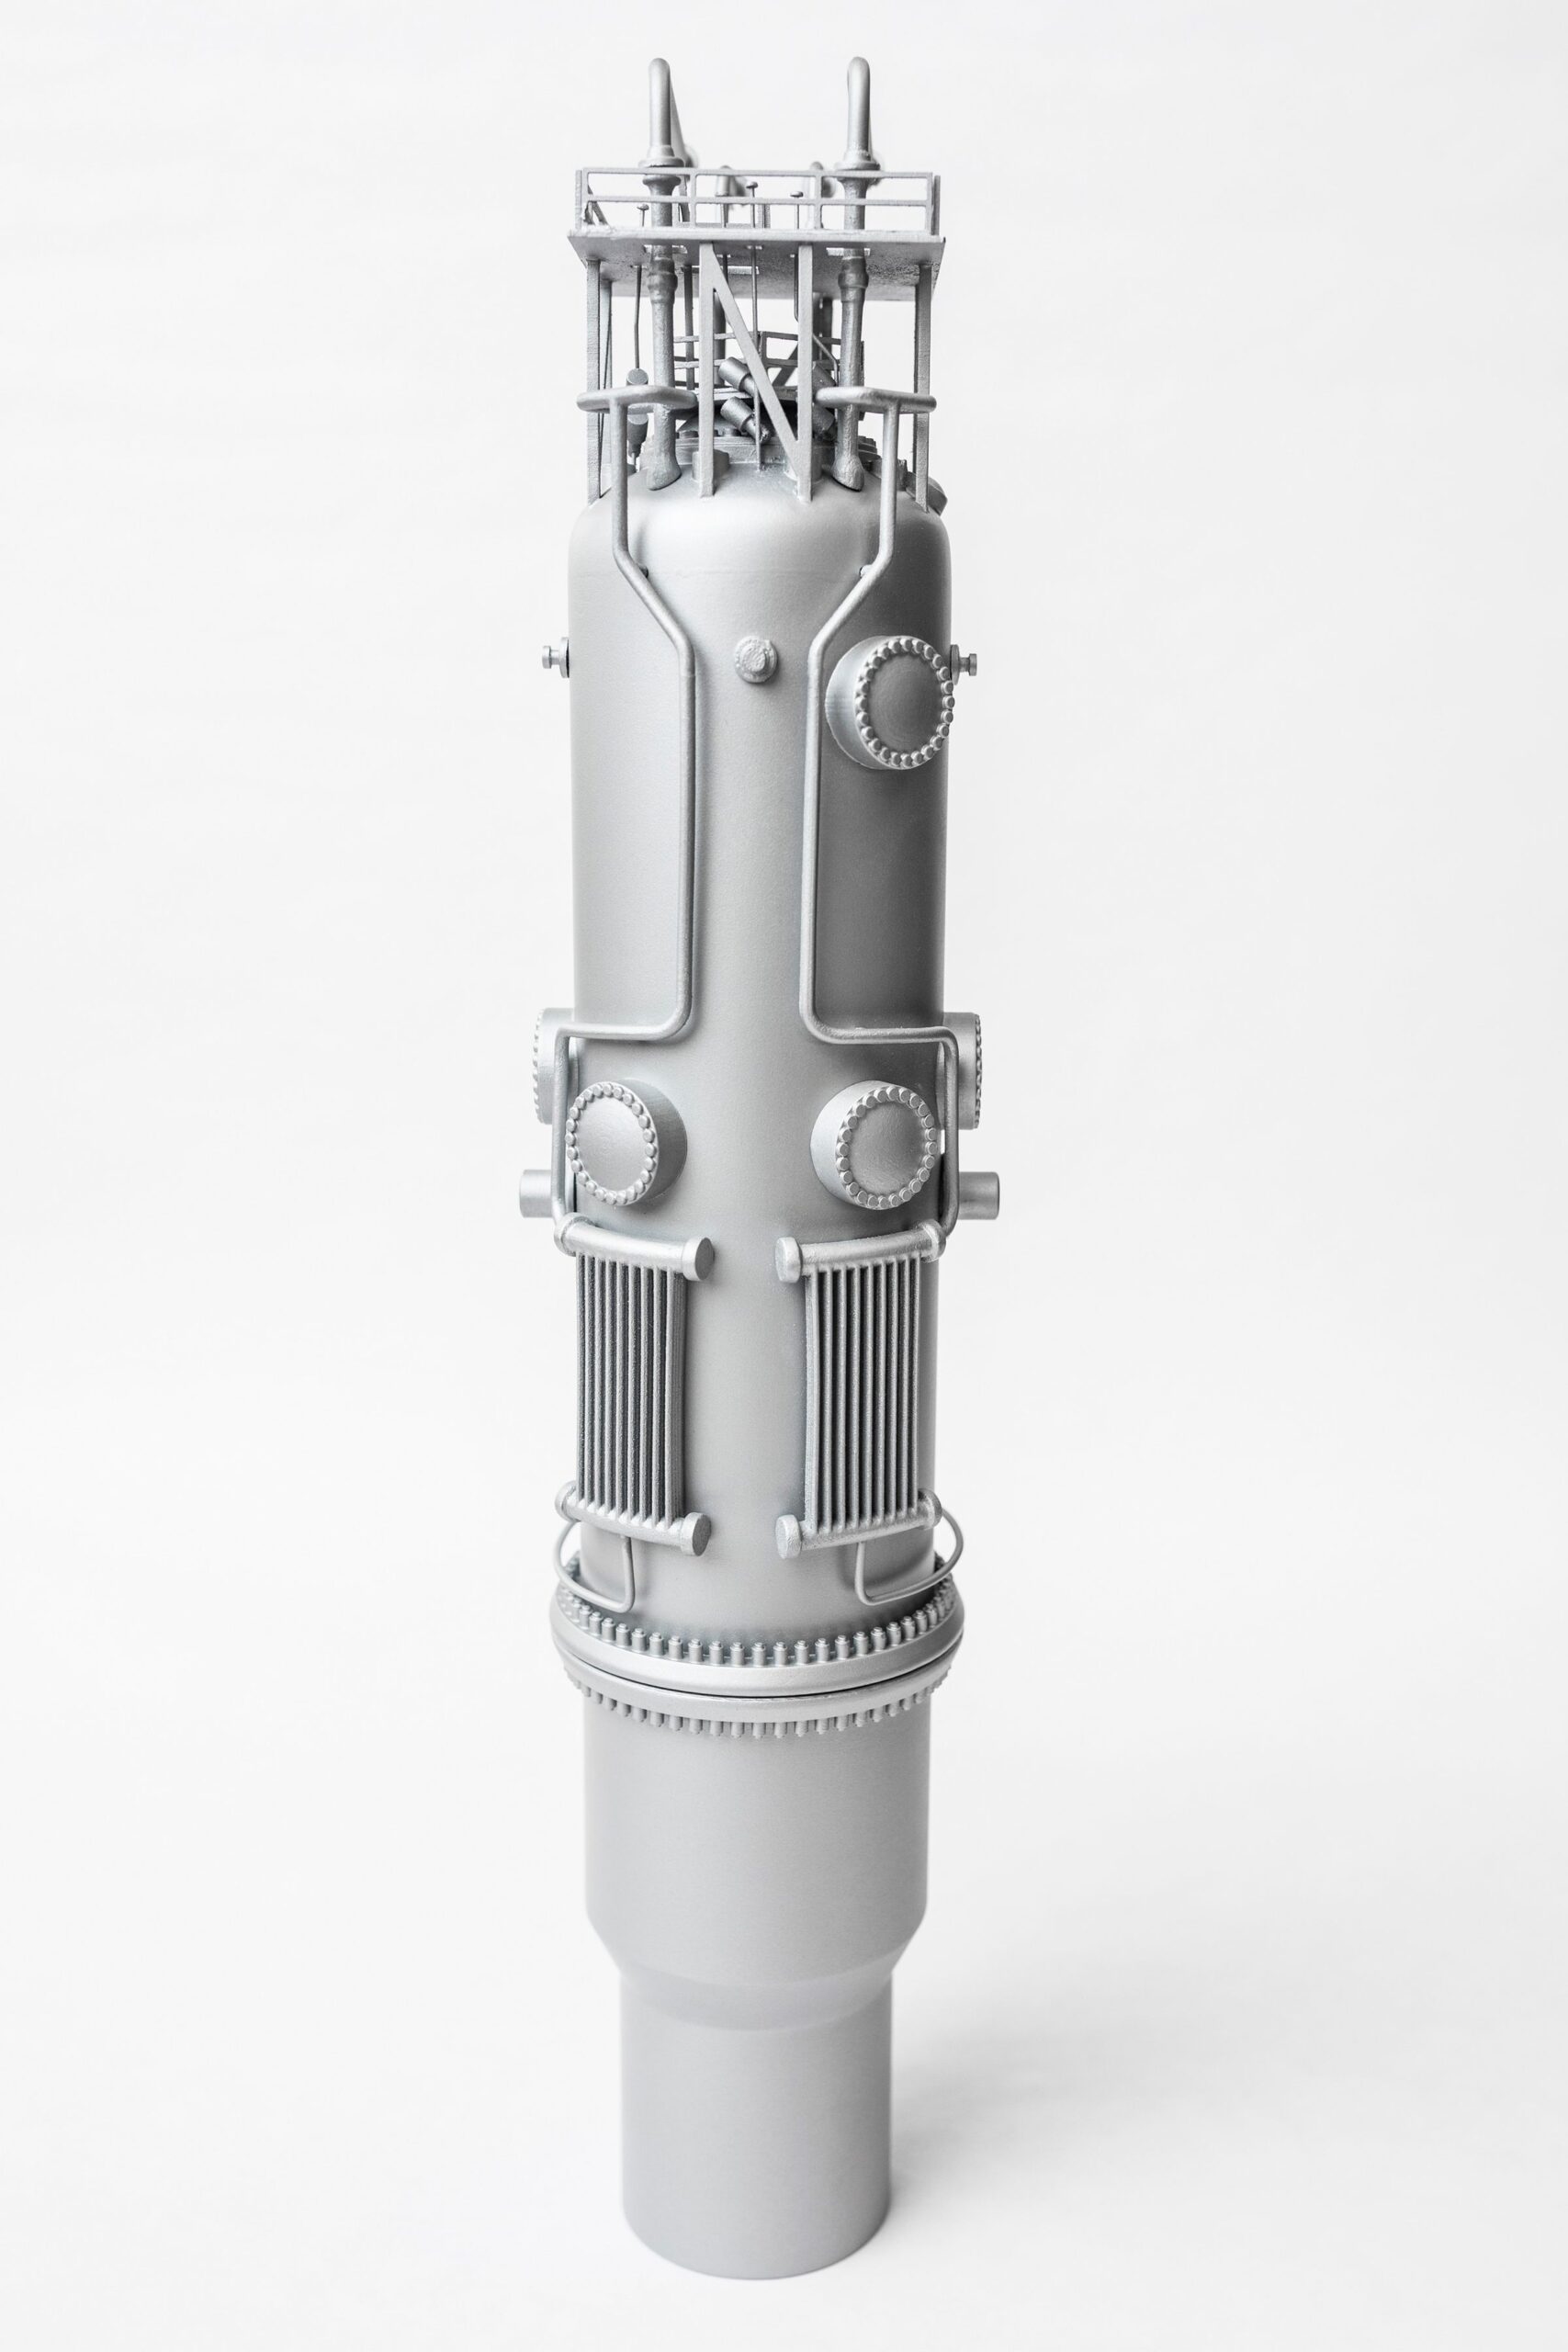 An artist rendering of a cylindrical, metal reactor